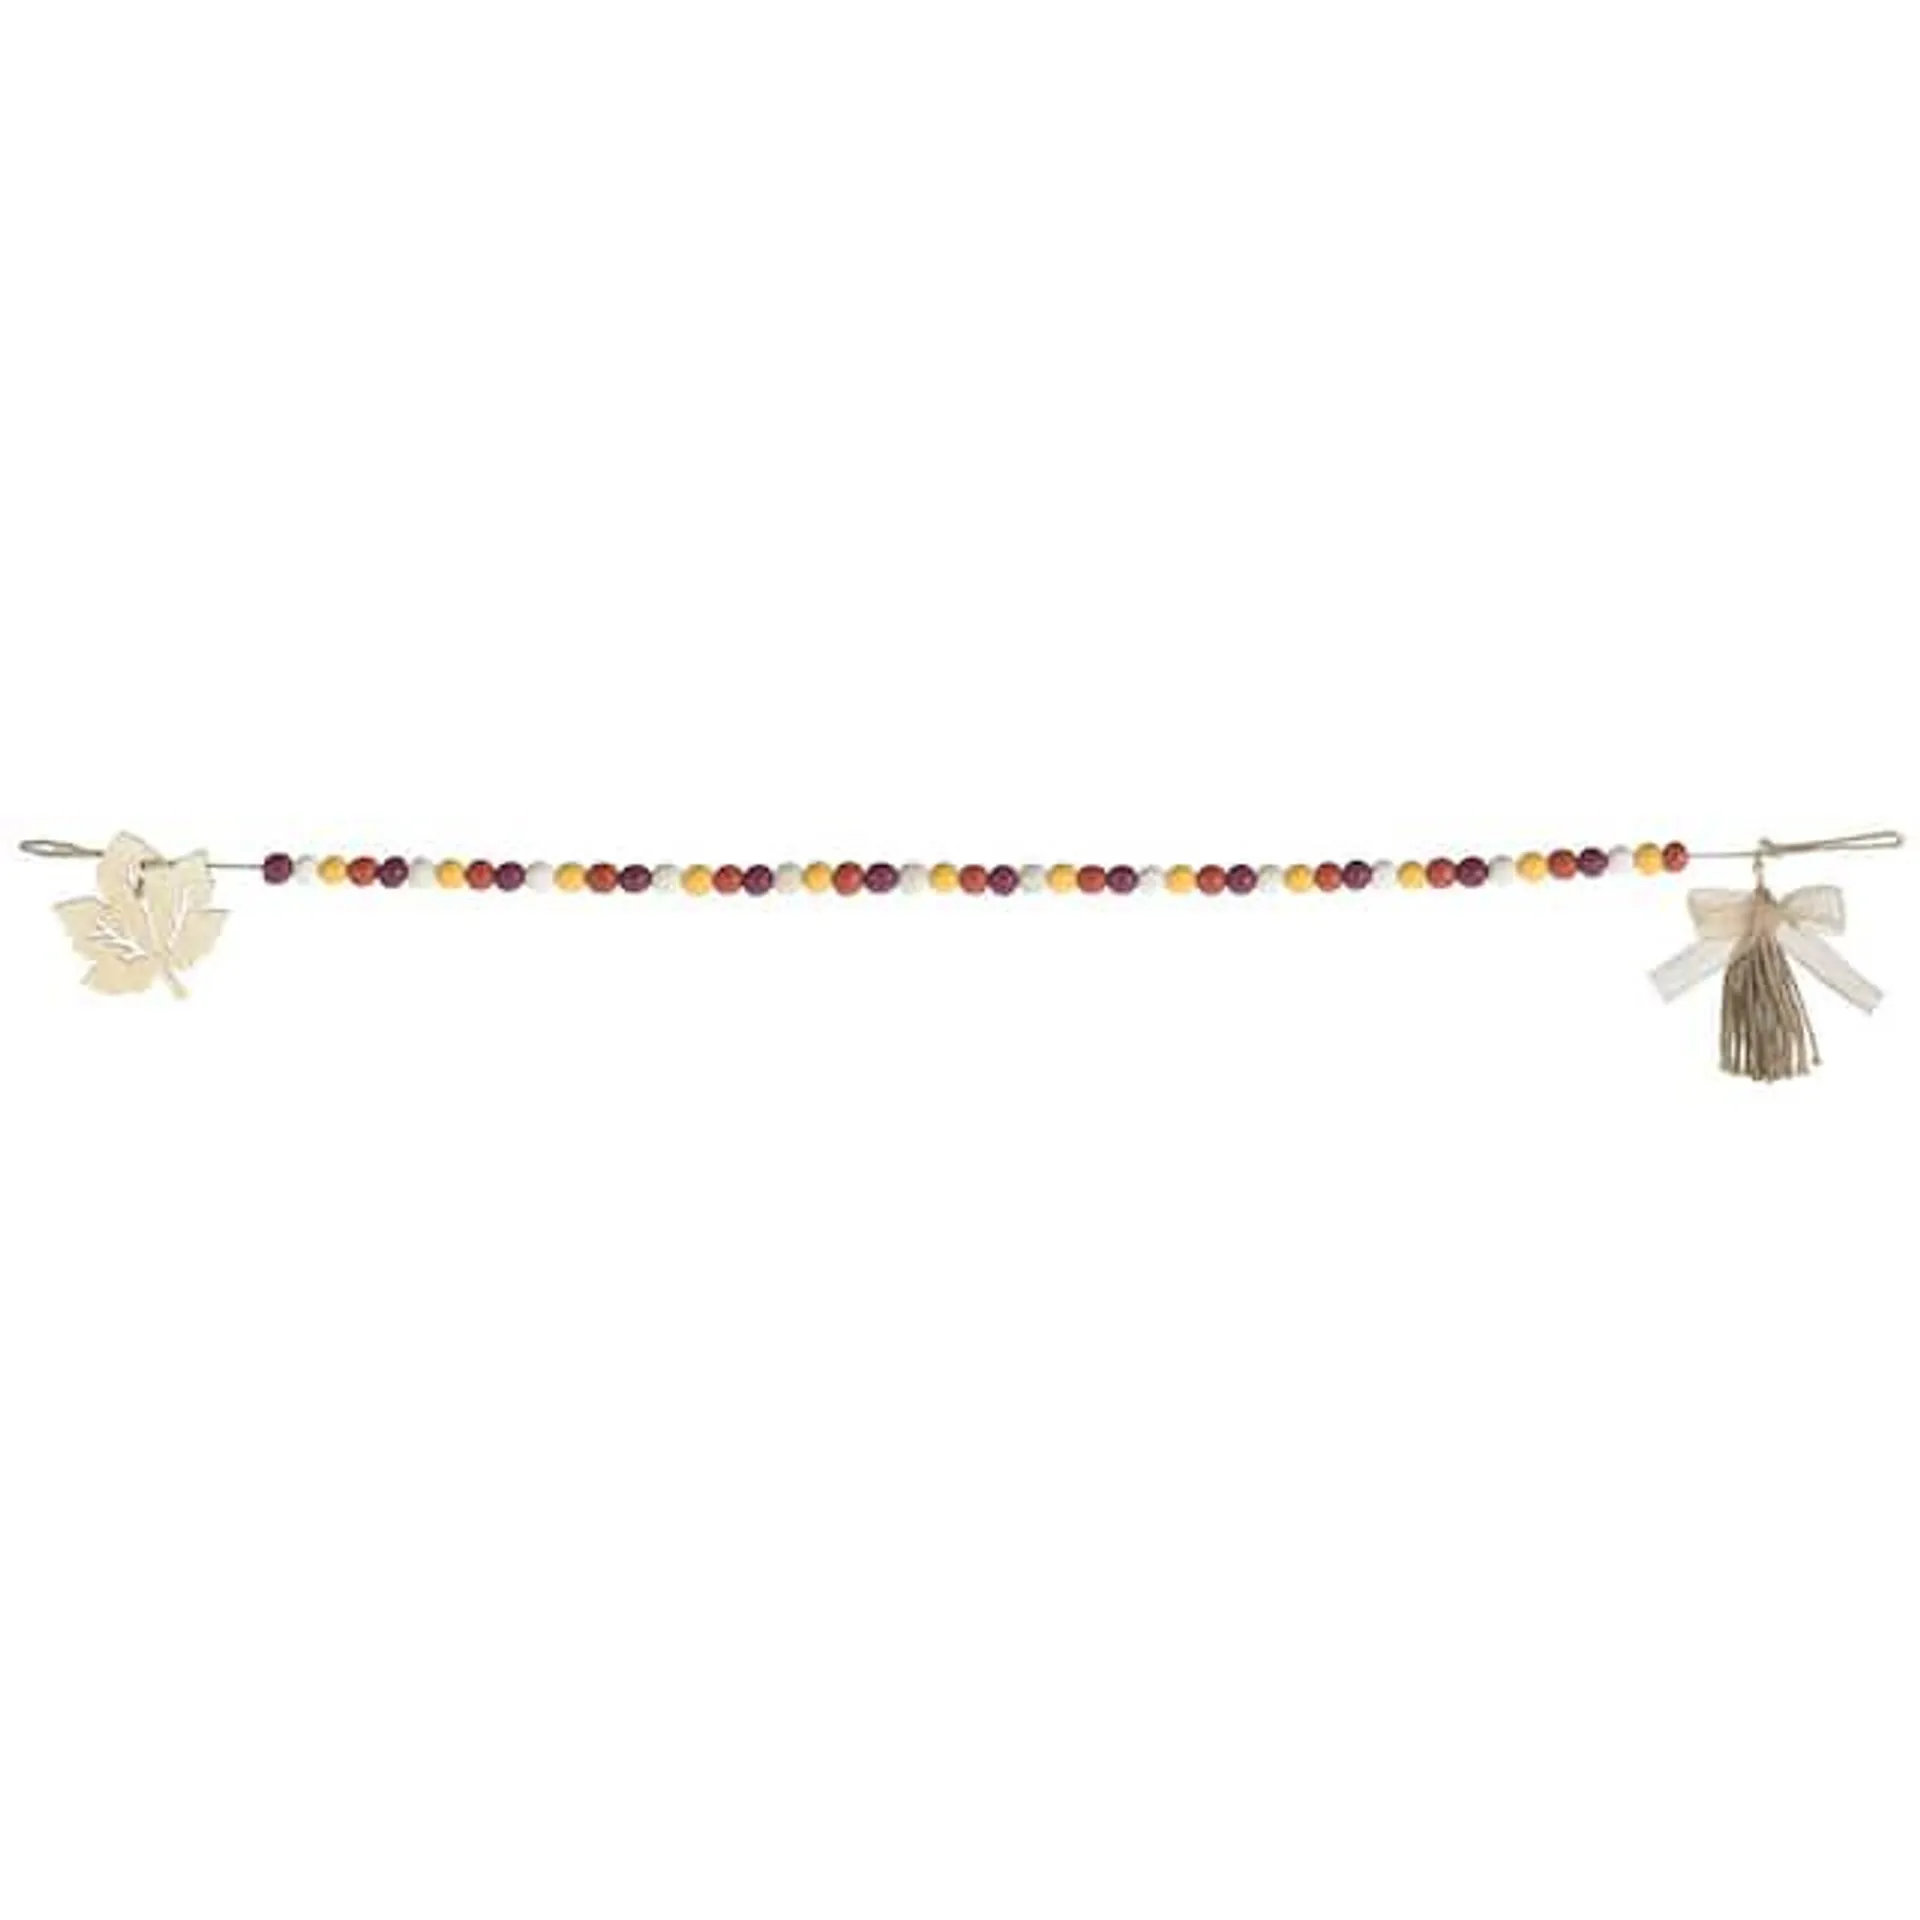 Wood Bead Garland, Multi-Coloured, 11.5-in, Indoor Decoration for Fall